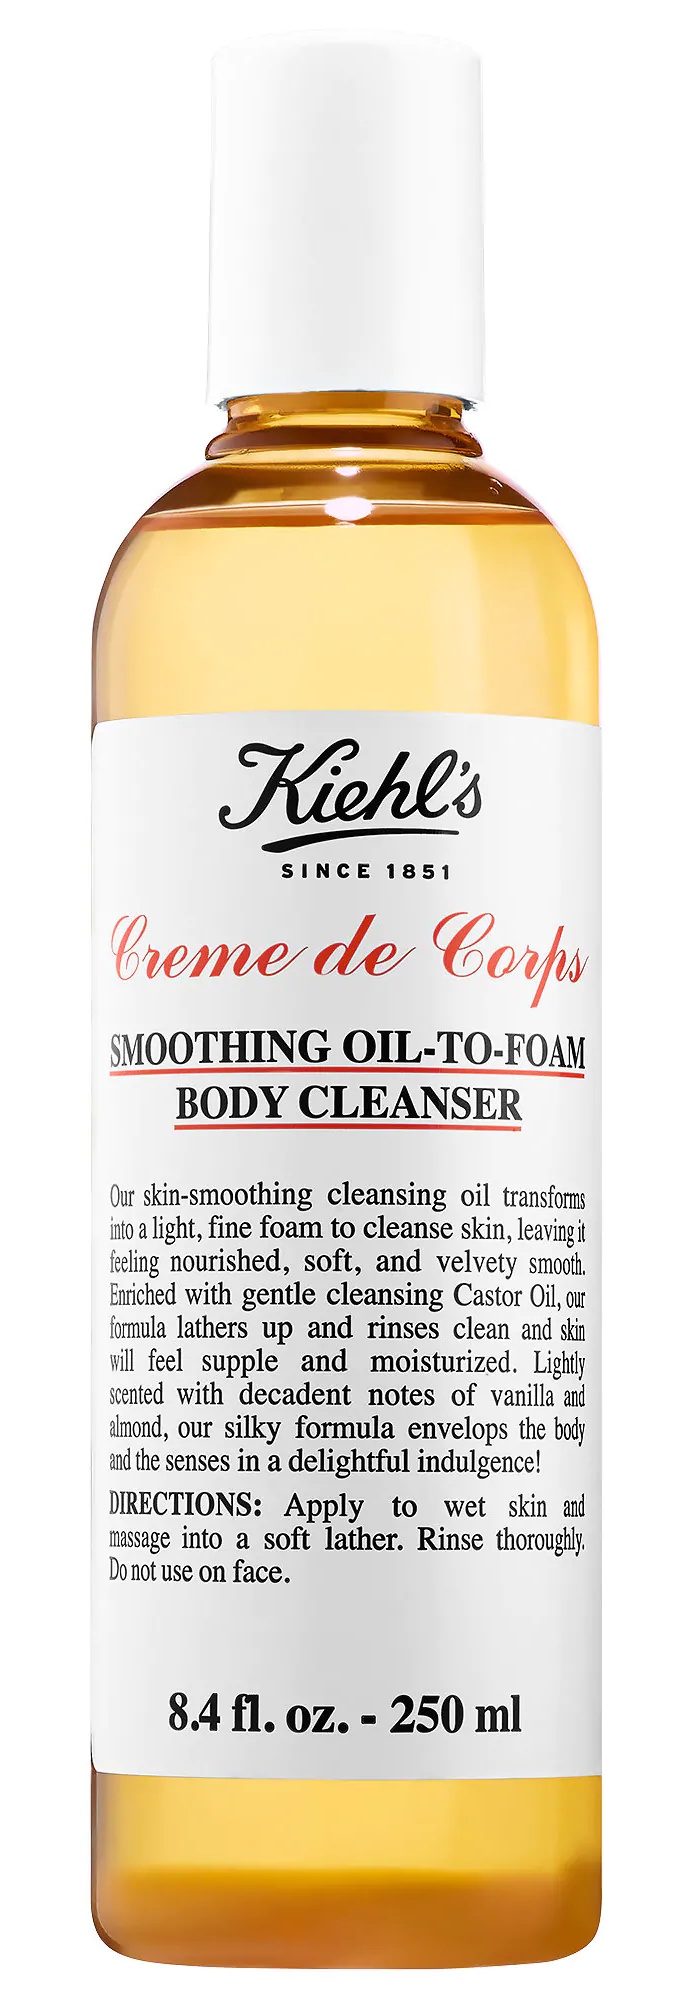 Kiehl’s Crème De Corps Smoothing Oil To Foam Body Cleanser